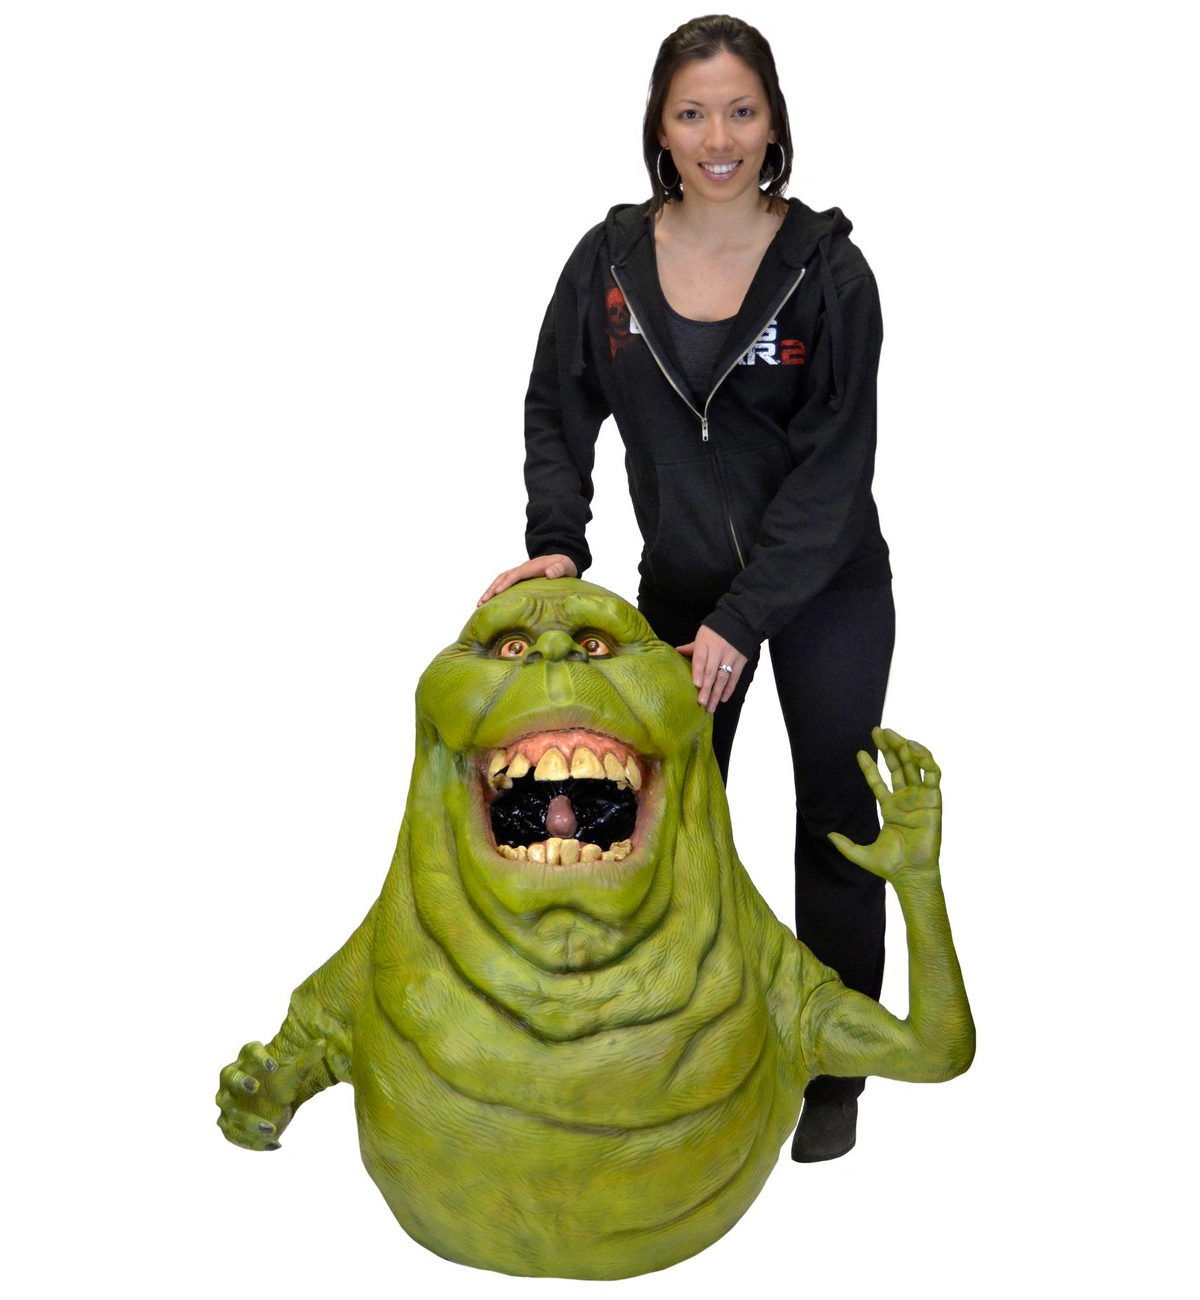 Shoot Your Own Ghostbusters Remake With This Life-Size Slimer Replica